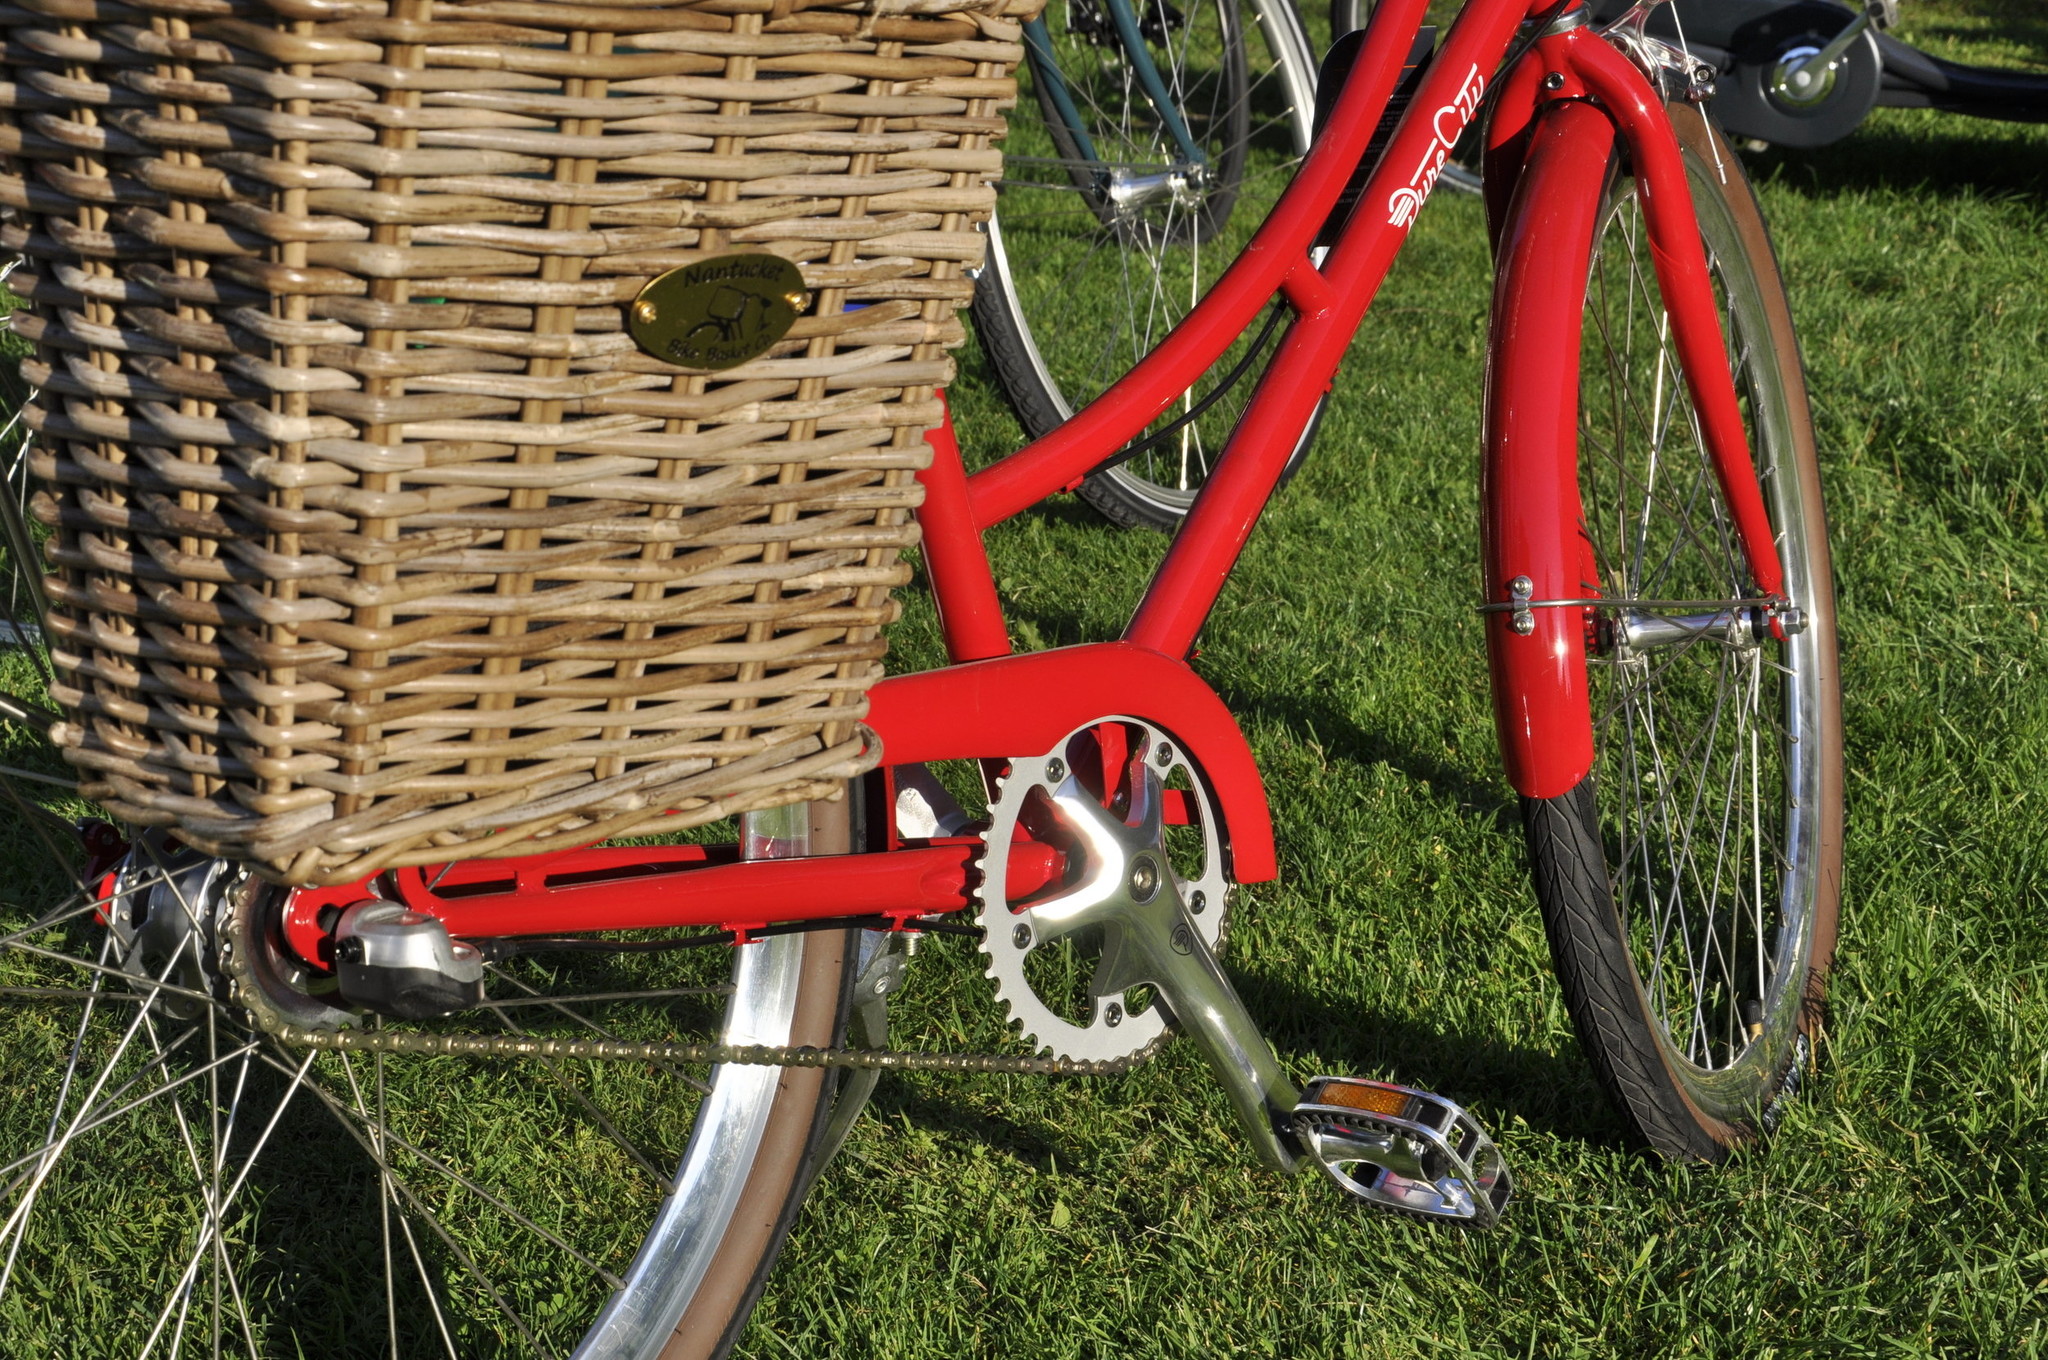 A closeup of a wicker basket on the back of a red step through Pure Cycles bicycle.